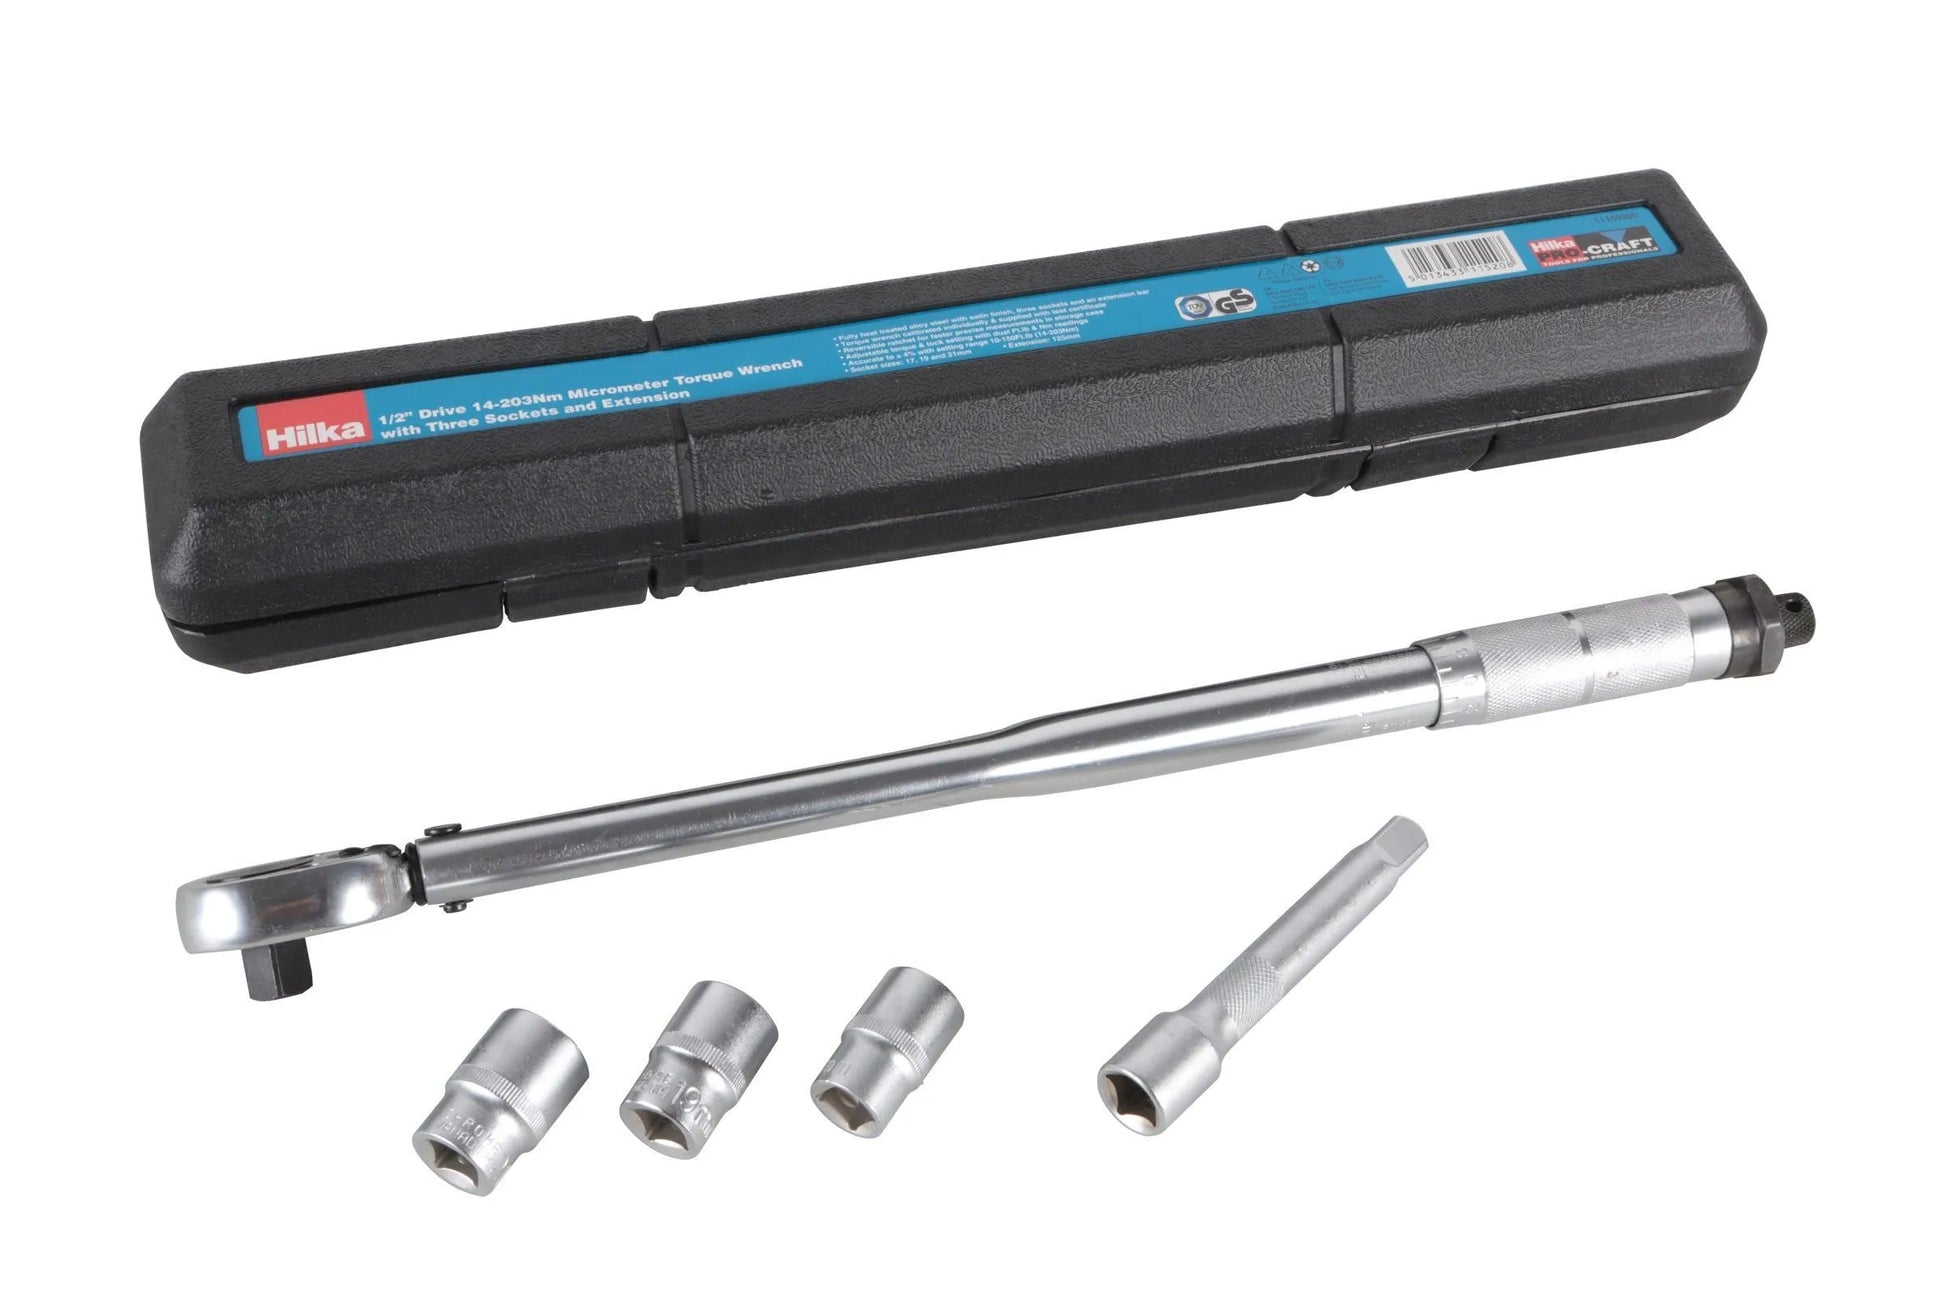 reliable and accurate torque wrench